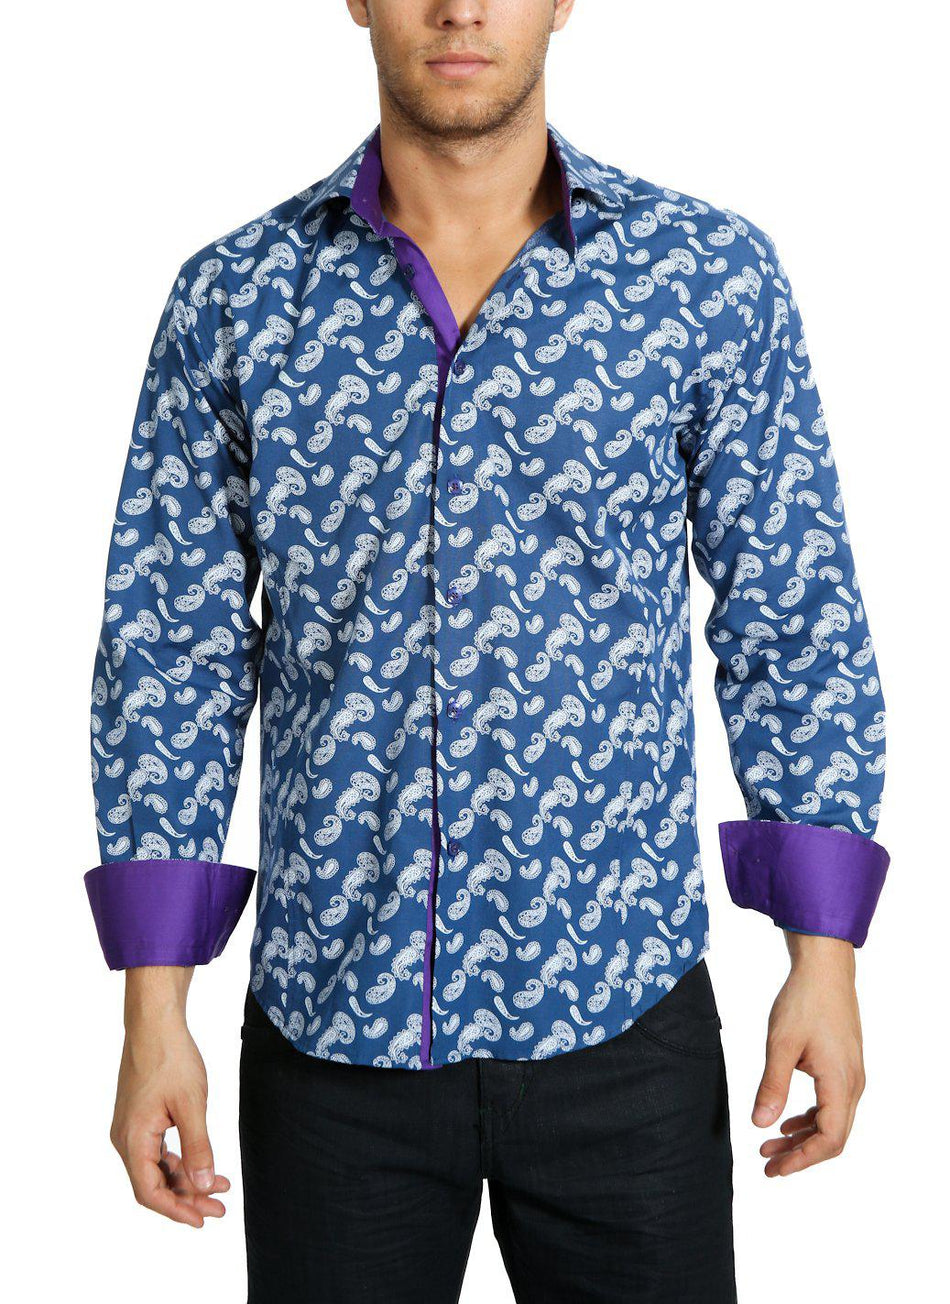 Men's Long Sleeve Dress Shirt with Repeating Paisley Pattern Navy